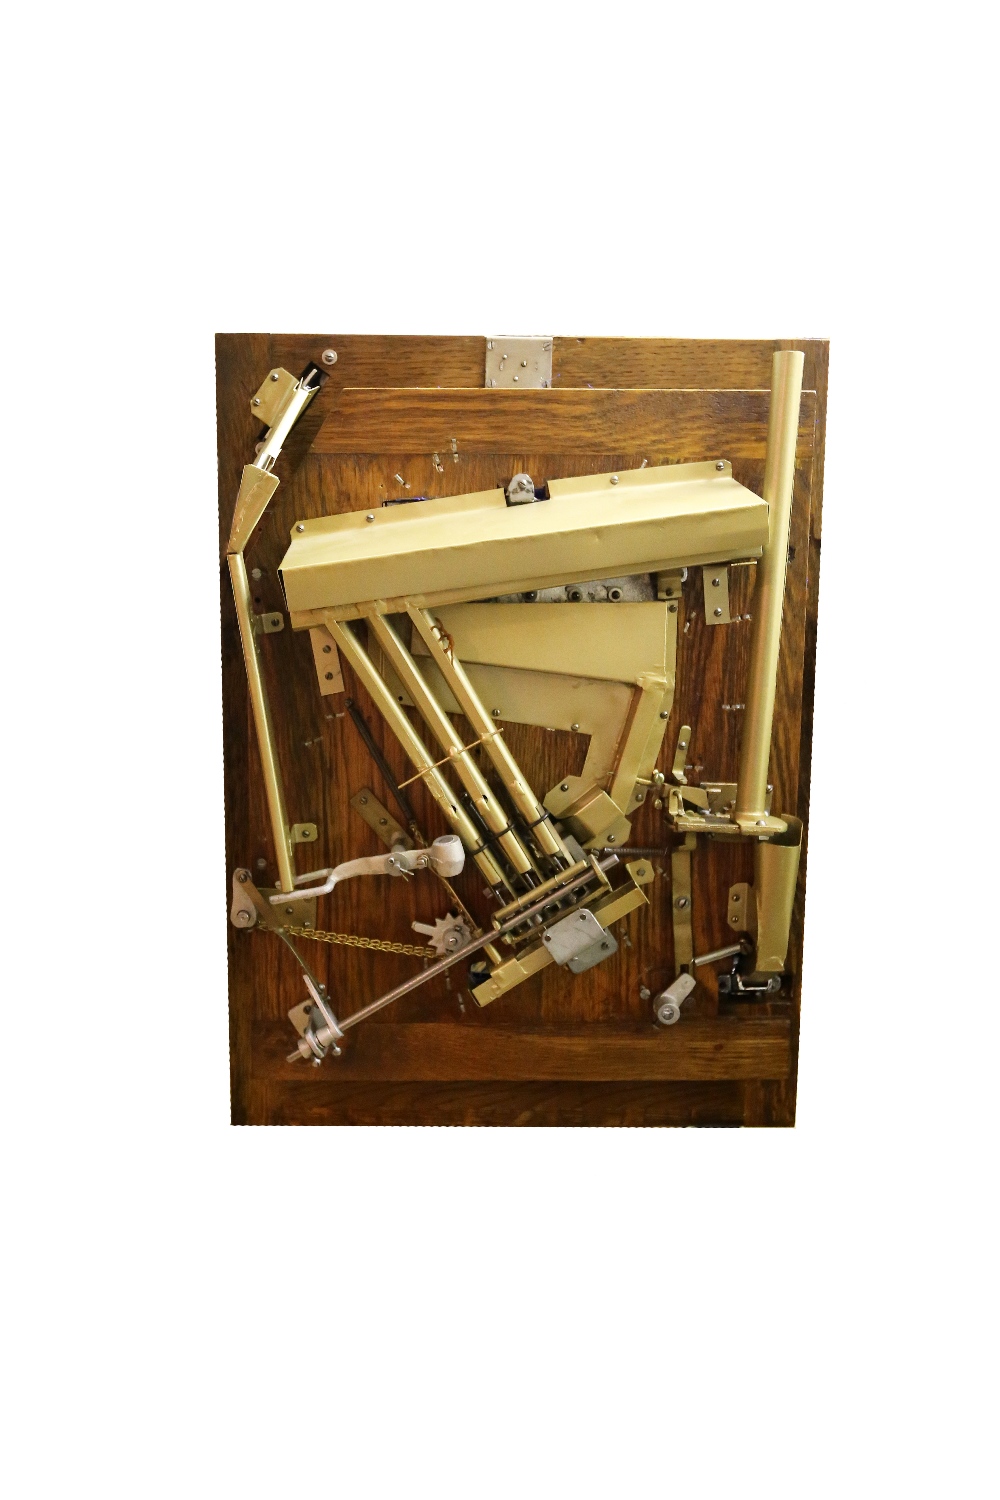 Automatic Skill All Sport Allwin Wall Machine 1910. This machine was manufactured in London at the - Image 5 of 7